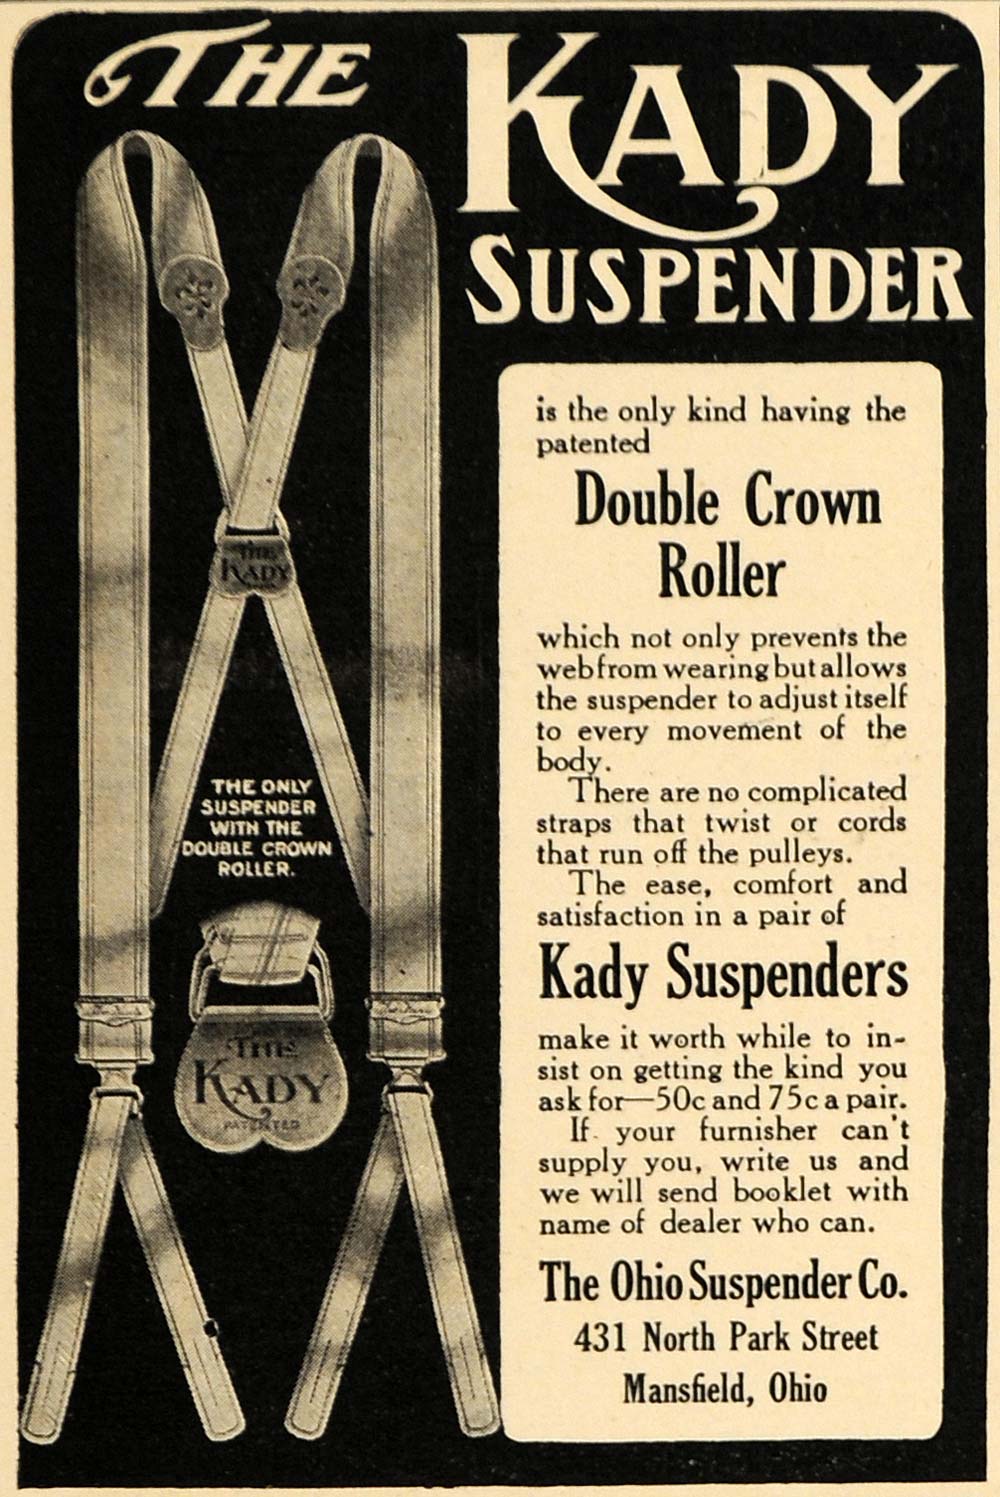 1908 Ad Kady Suspender Clothing Double Crown Roller - ORIGINAL ADVERTISING TW1